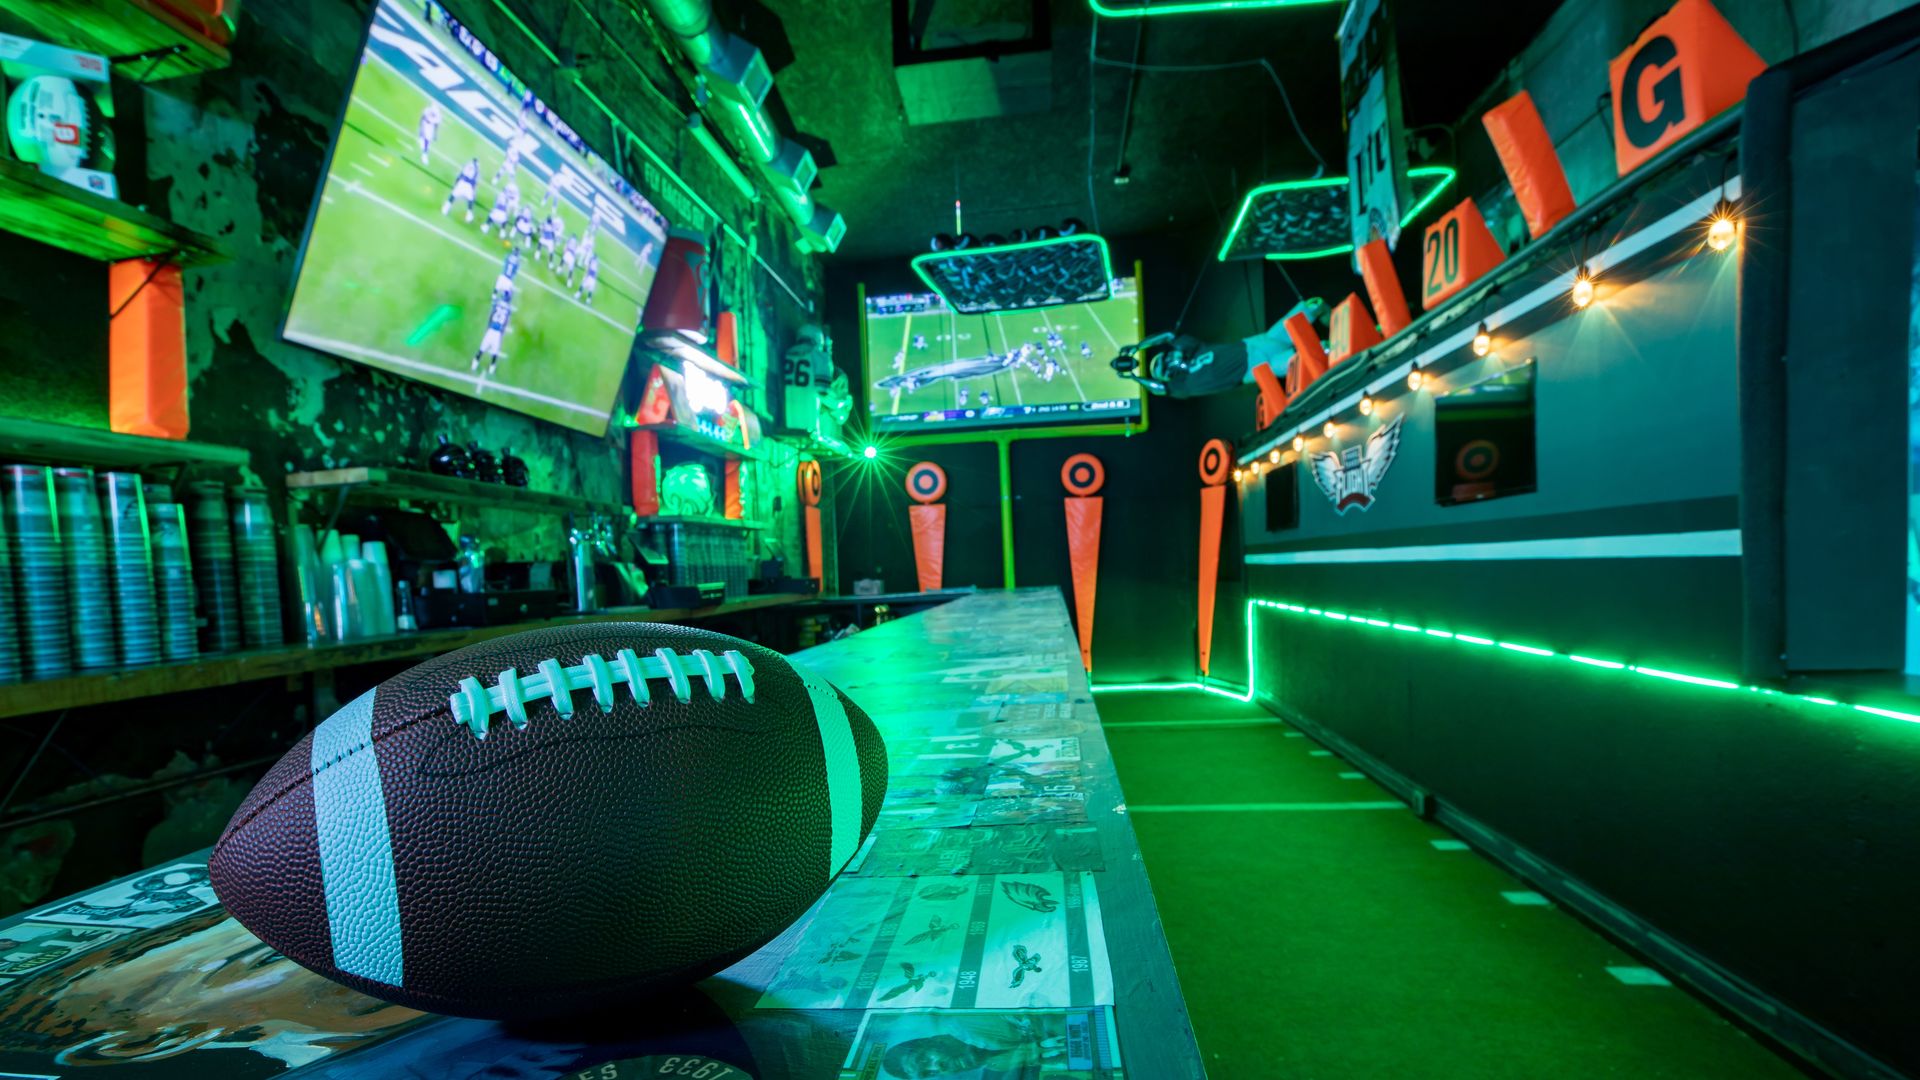 A football sitting on a bar in front of televisions